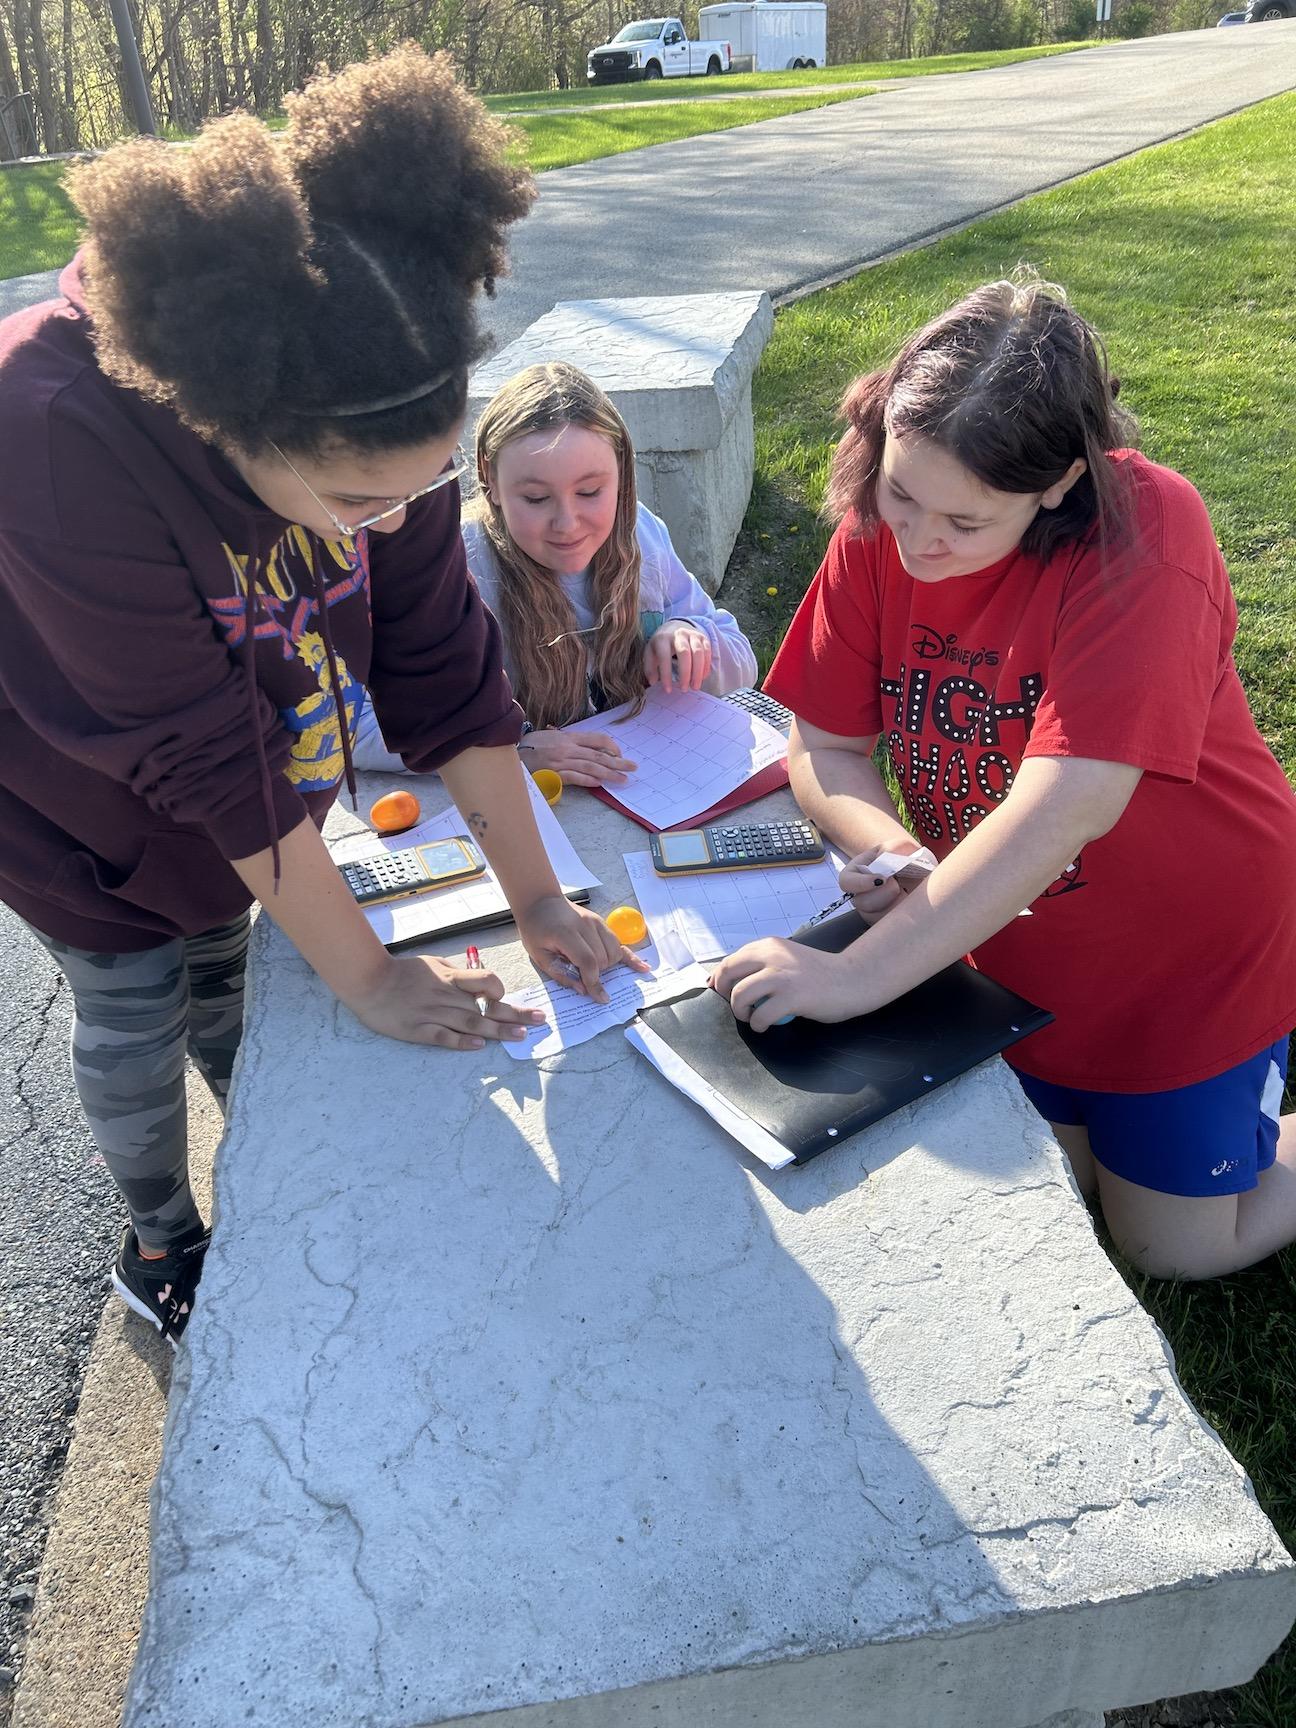 Carmella Dubbs, Katelyn Funk, and Melodie Funk work together to solve a math problem